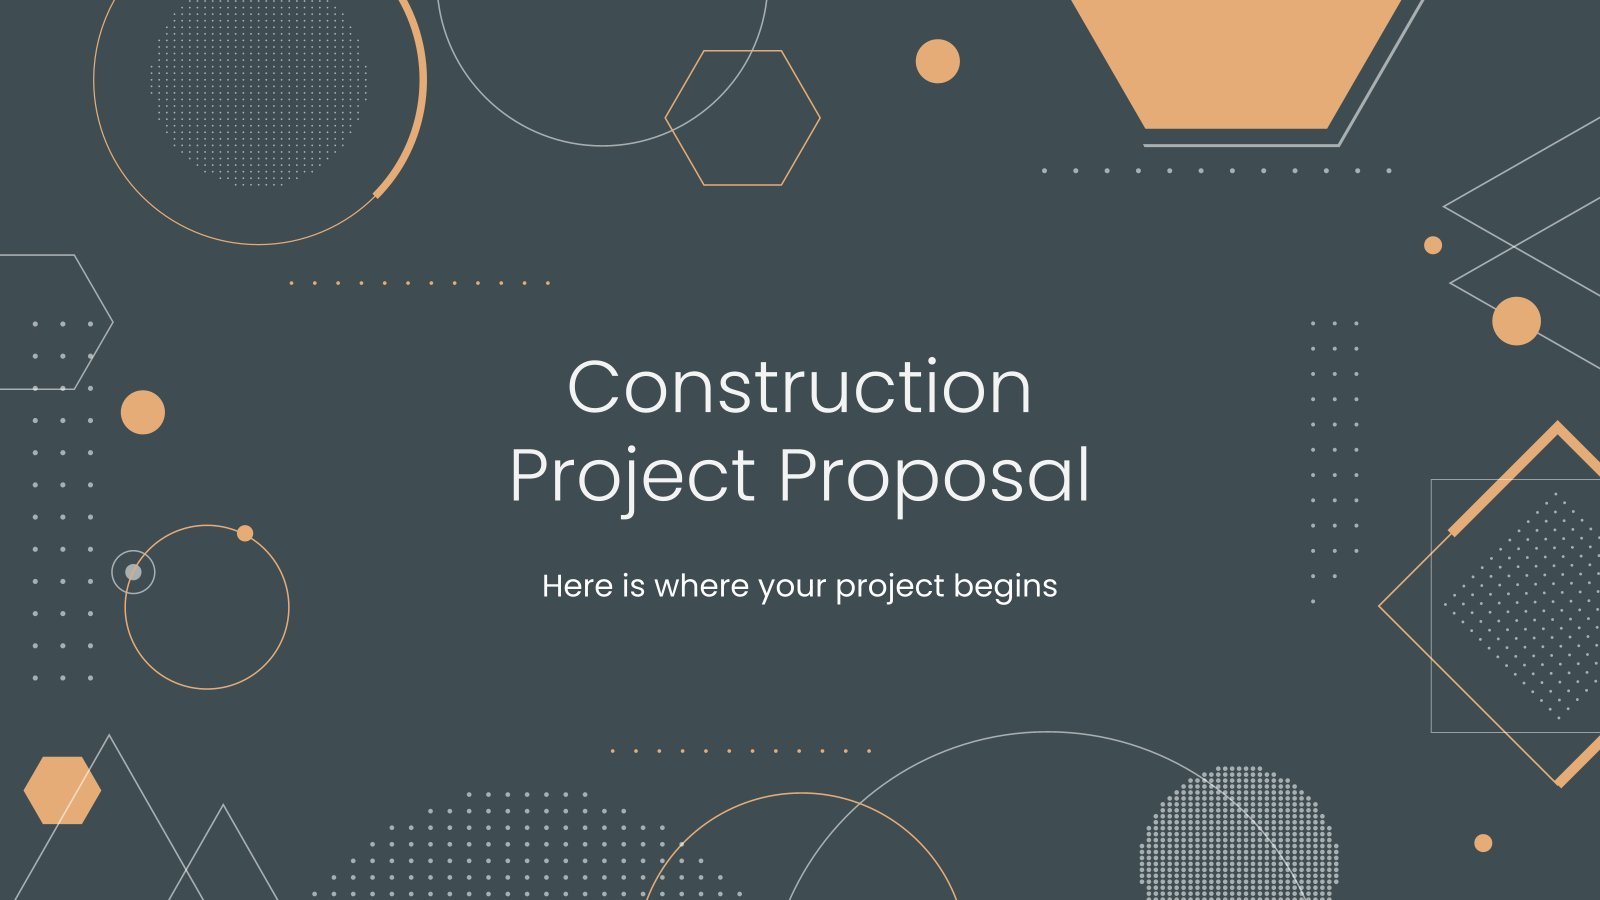 Construction Project Proposal presentation template 